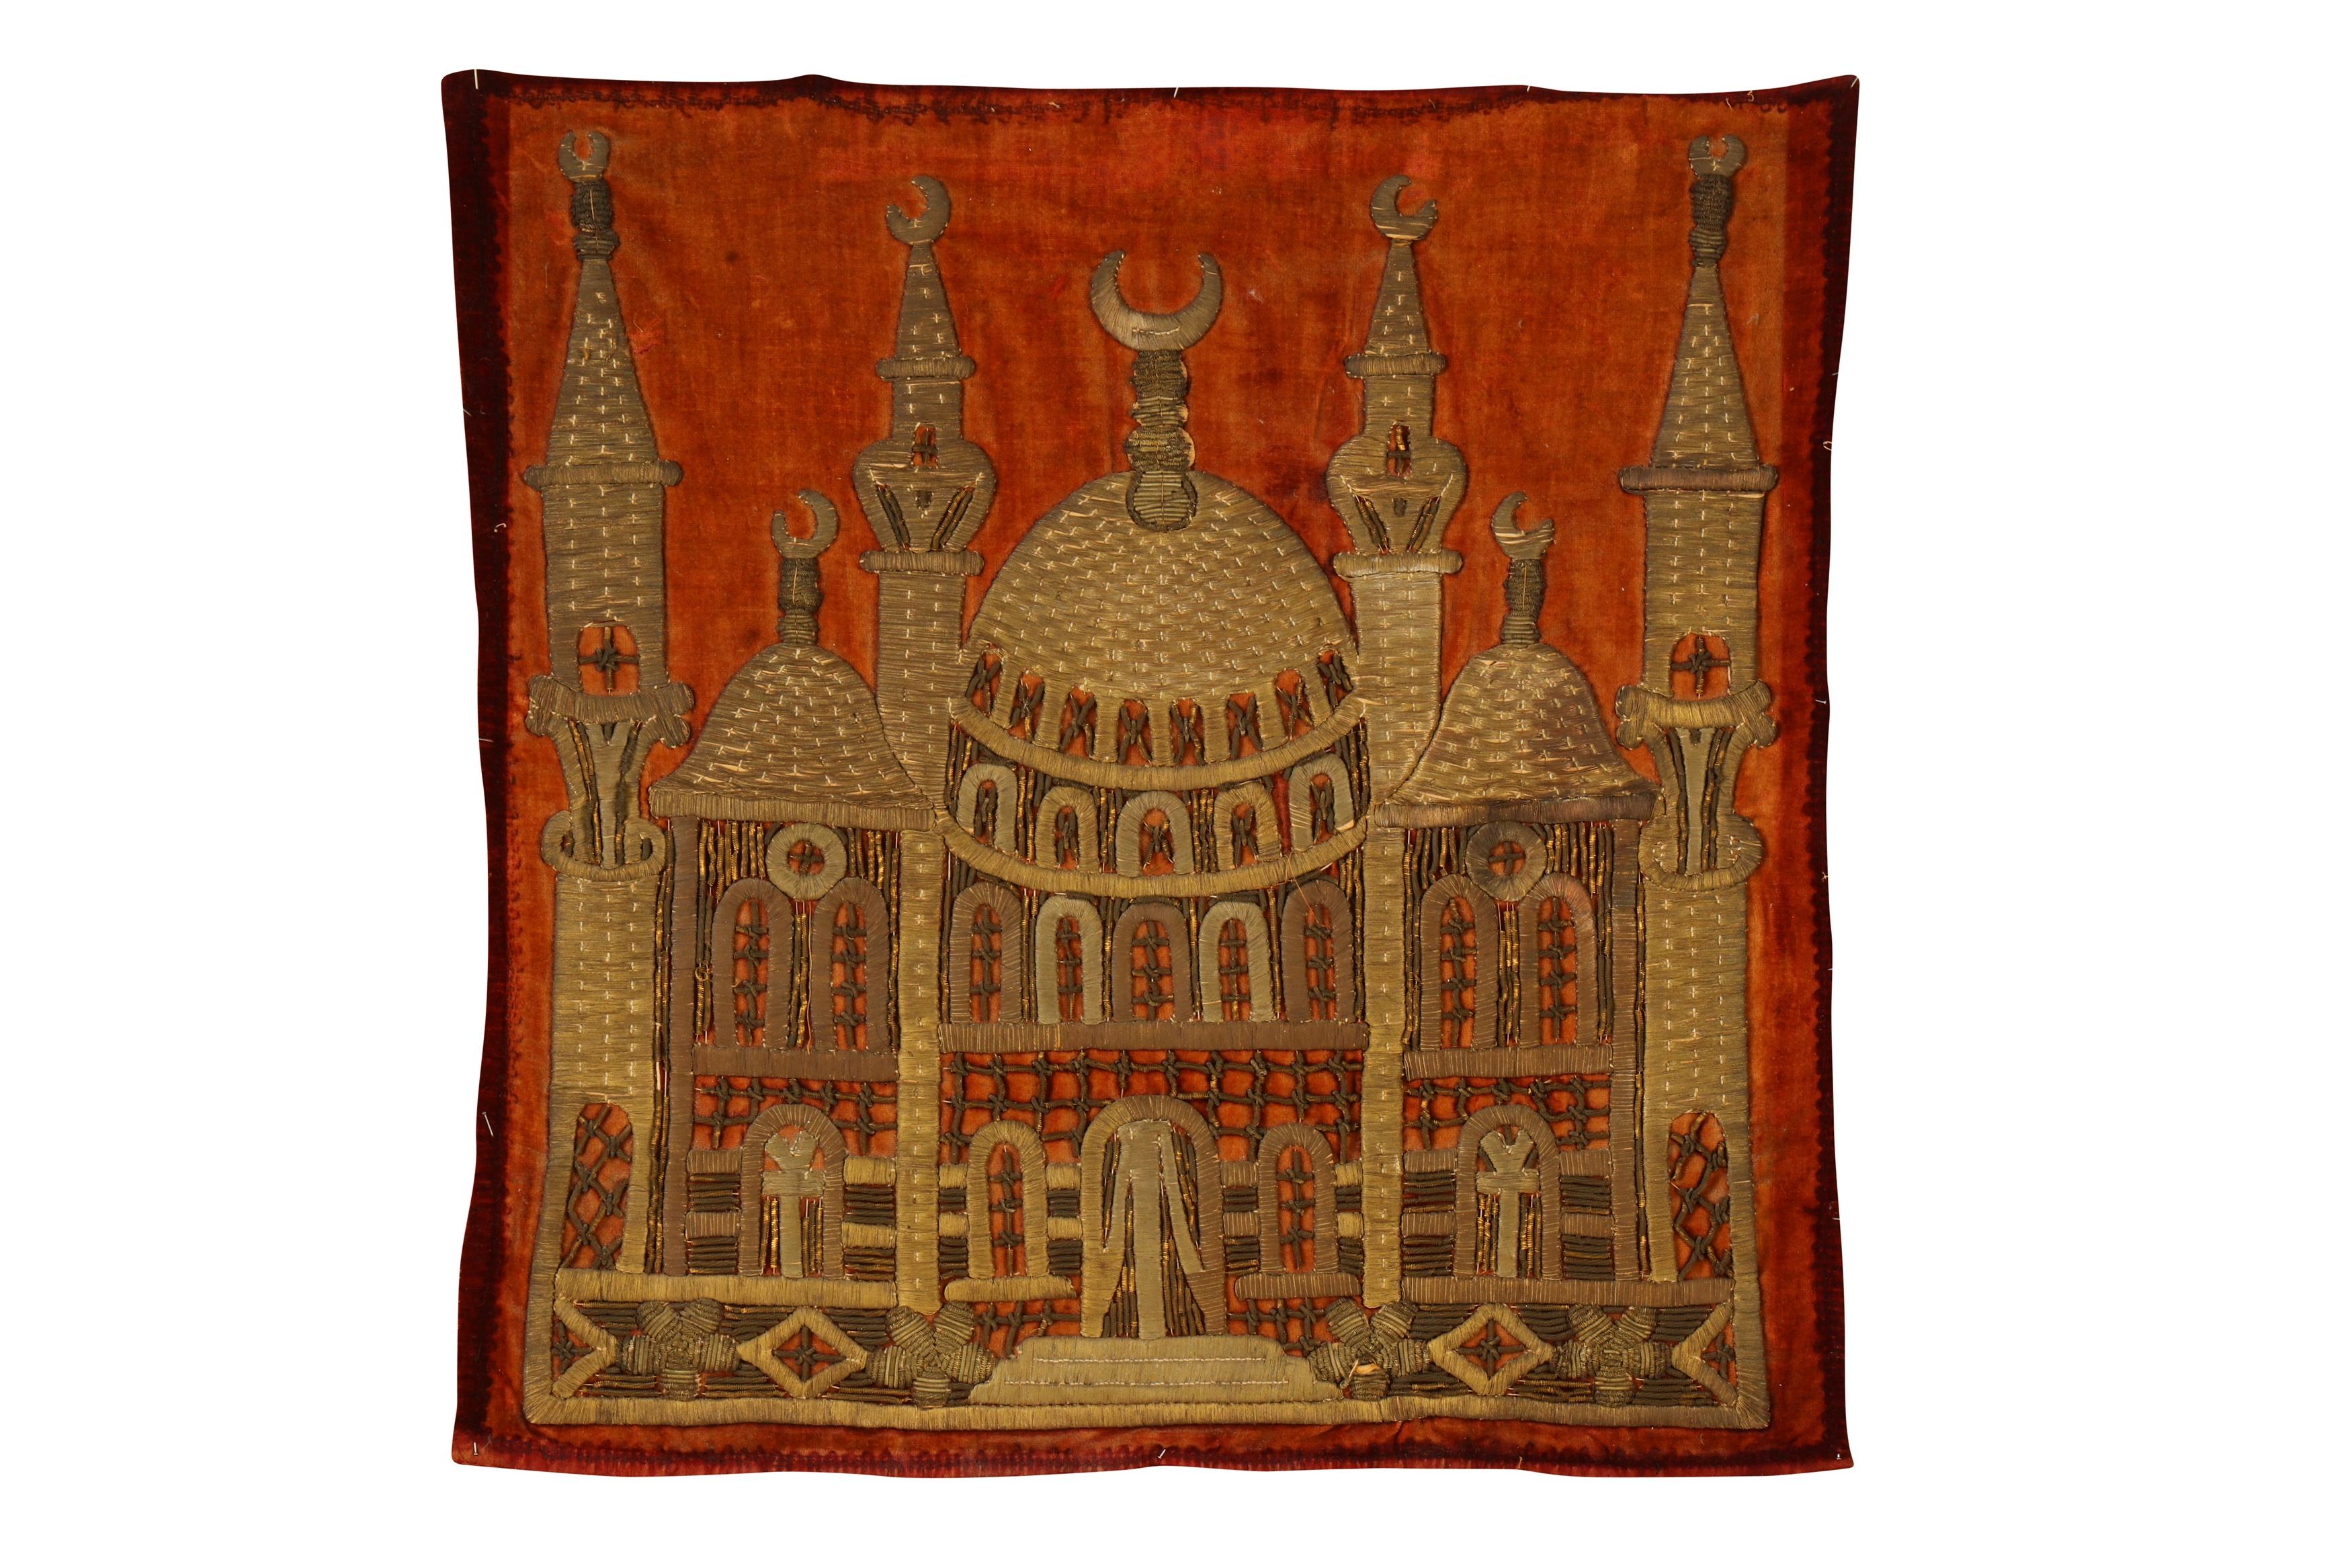 A 19TH CENTURY OTTOMAN TURKISH SILVER THREAD EMBROIDERED VELVET CUSHION COVER